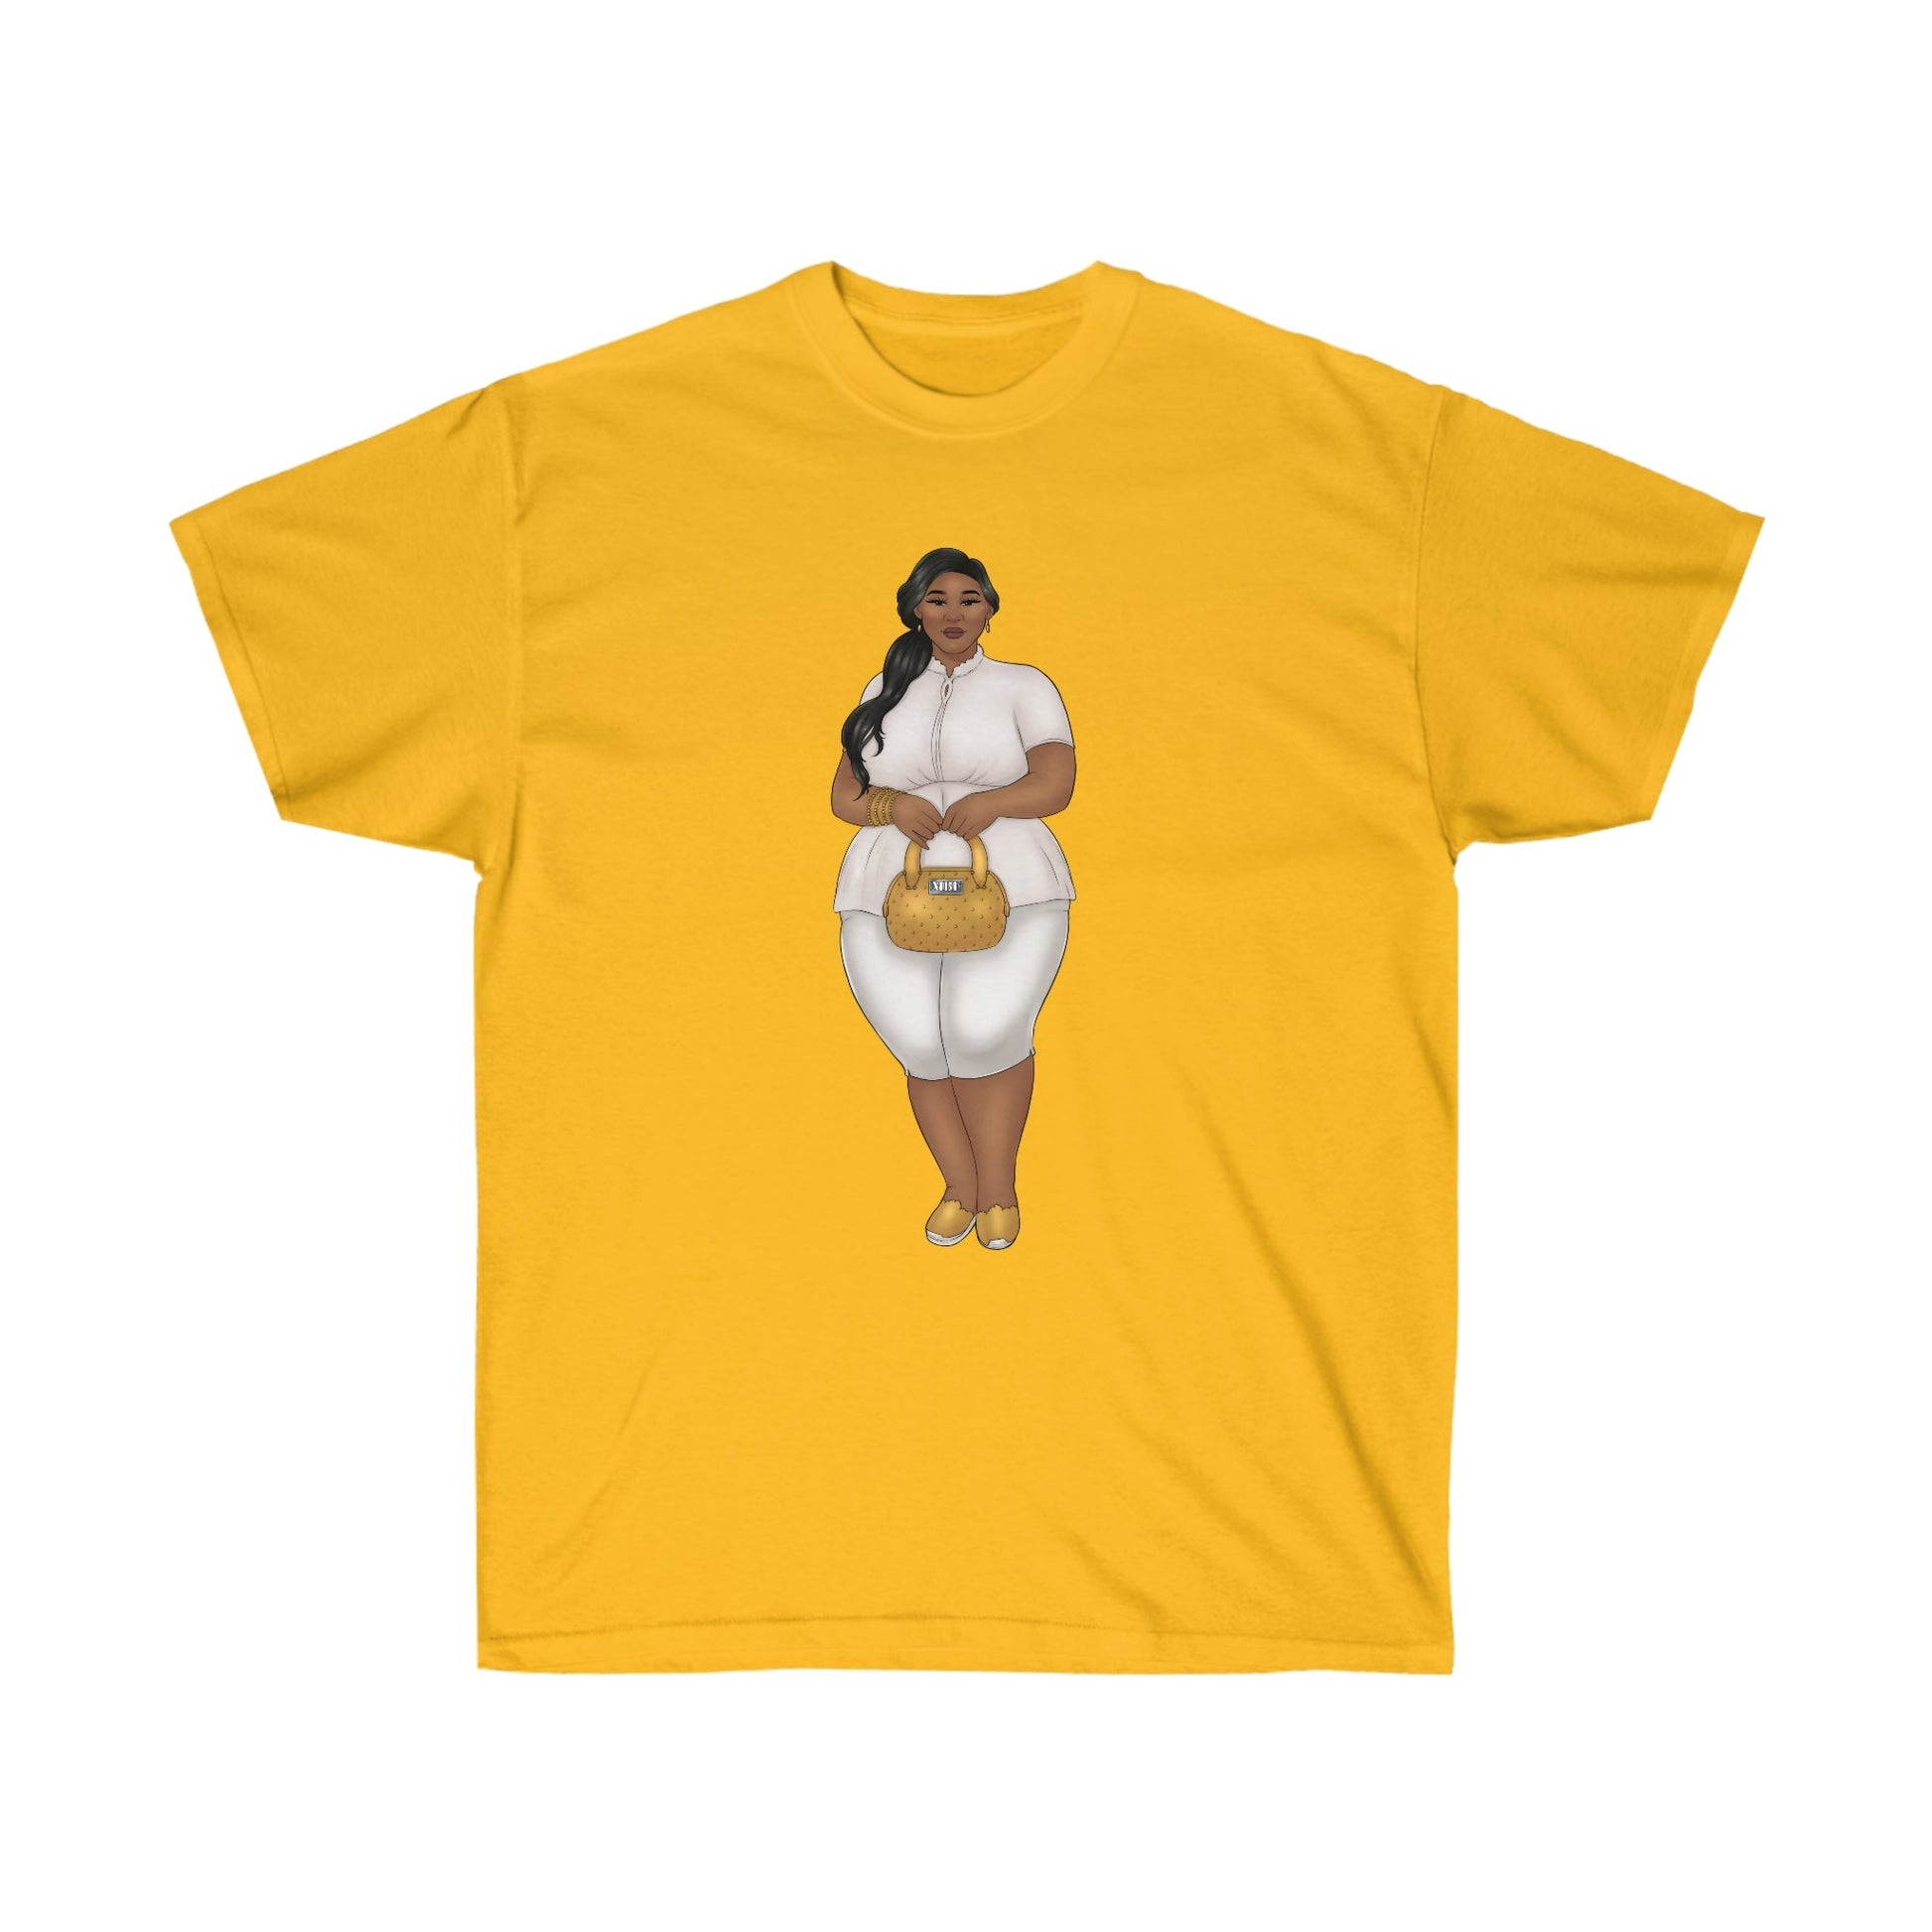 Nicole Show Off Your Fluff Unisex Ultra Cotton Tee S- 5XL T-Shirt Printify Gold S 